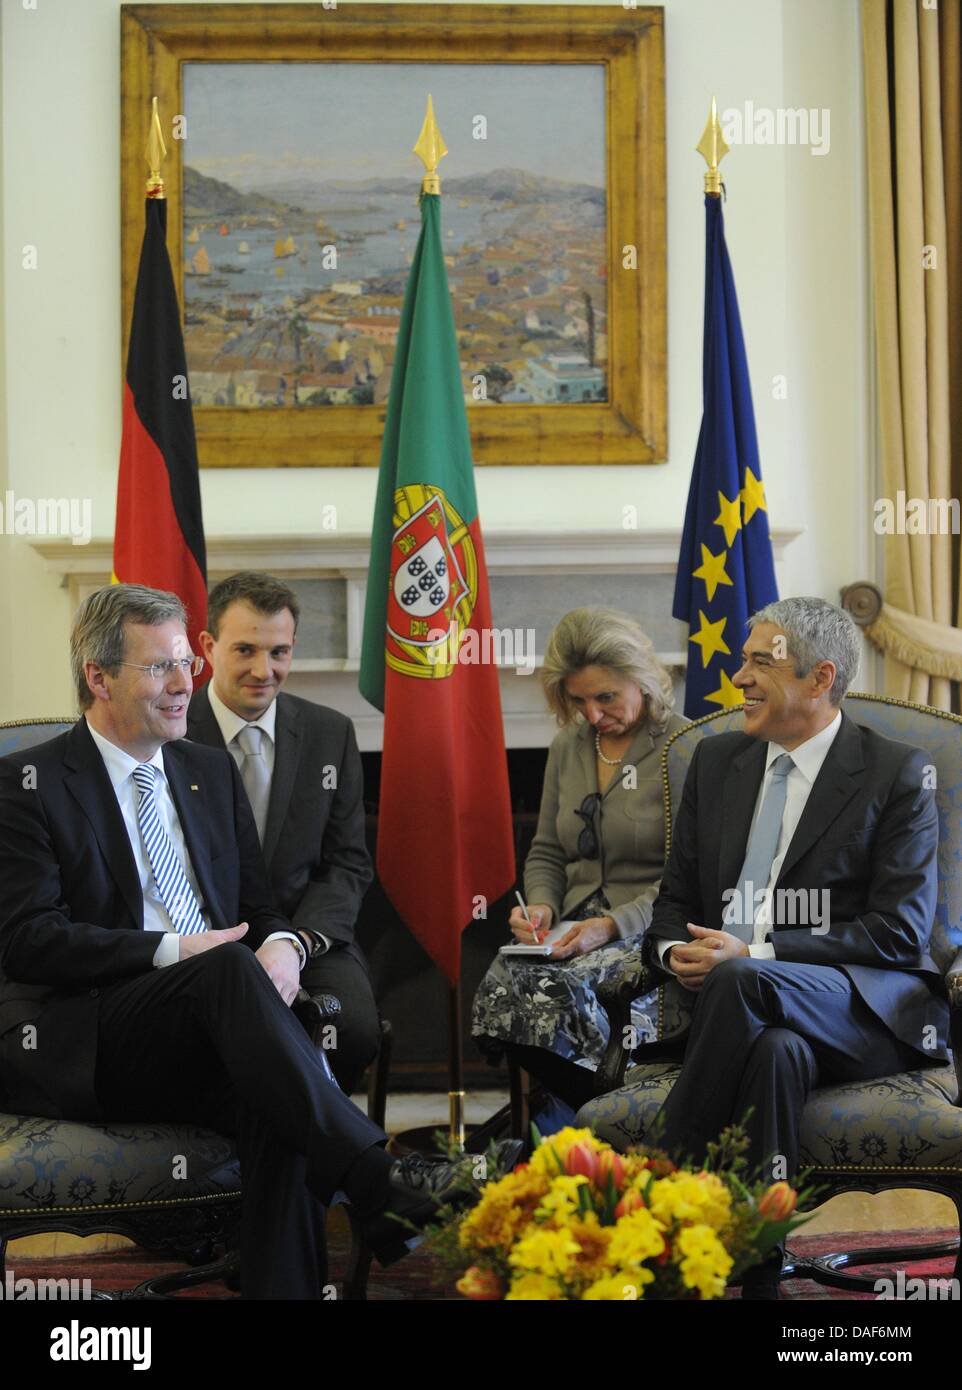 German President Christian Wulff (L) and the portuguese Prime Minister Jose Socrates talking at his residency in Lisboa, Portugal on 11 february 2011. Wulff will be in Portugal and Spain for inaugural visits until friday. Photo: RAINER JENSEN Stock Photo